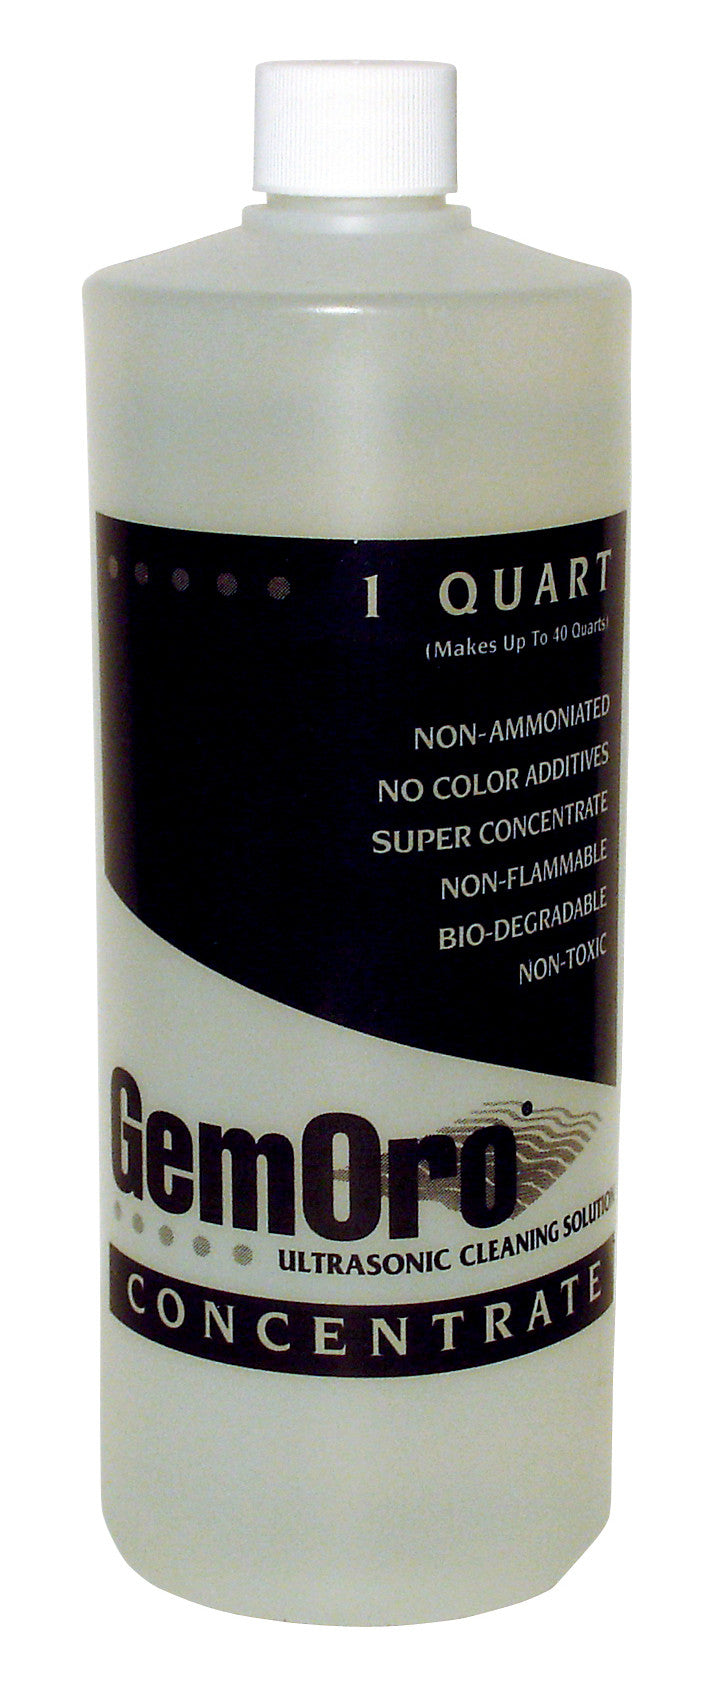 GemOro Ultrasonic Jewelry Cleaner Solution – Concentrate Gallon